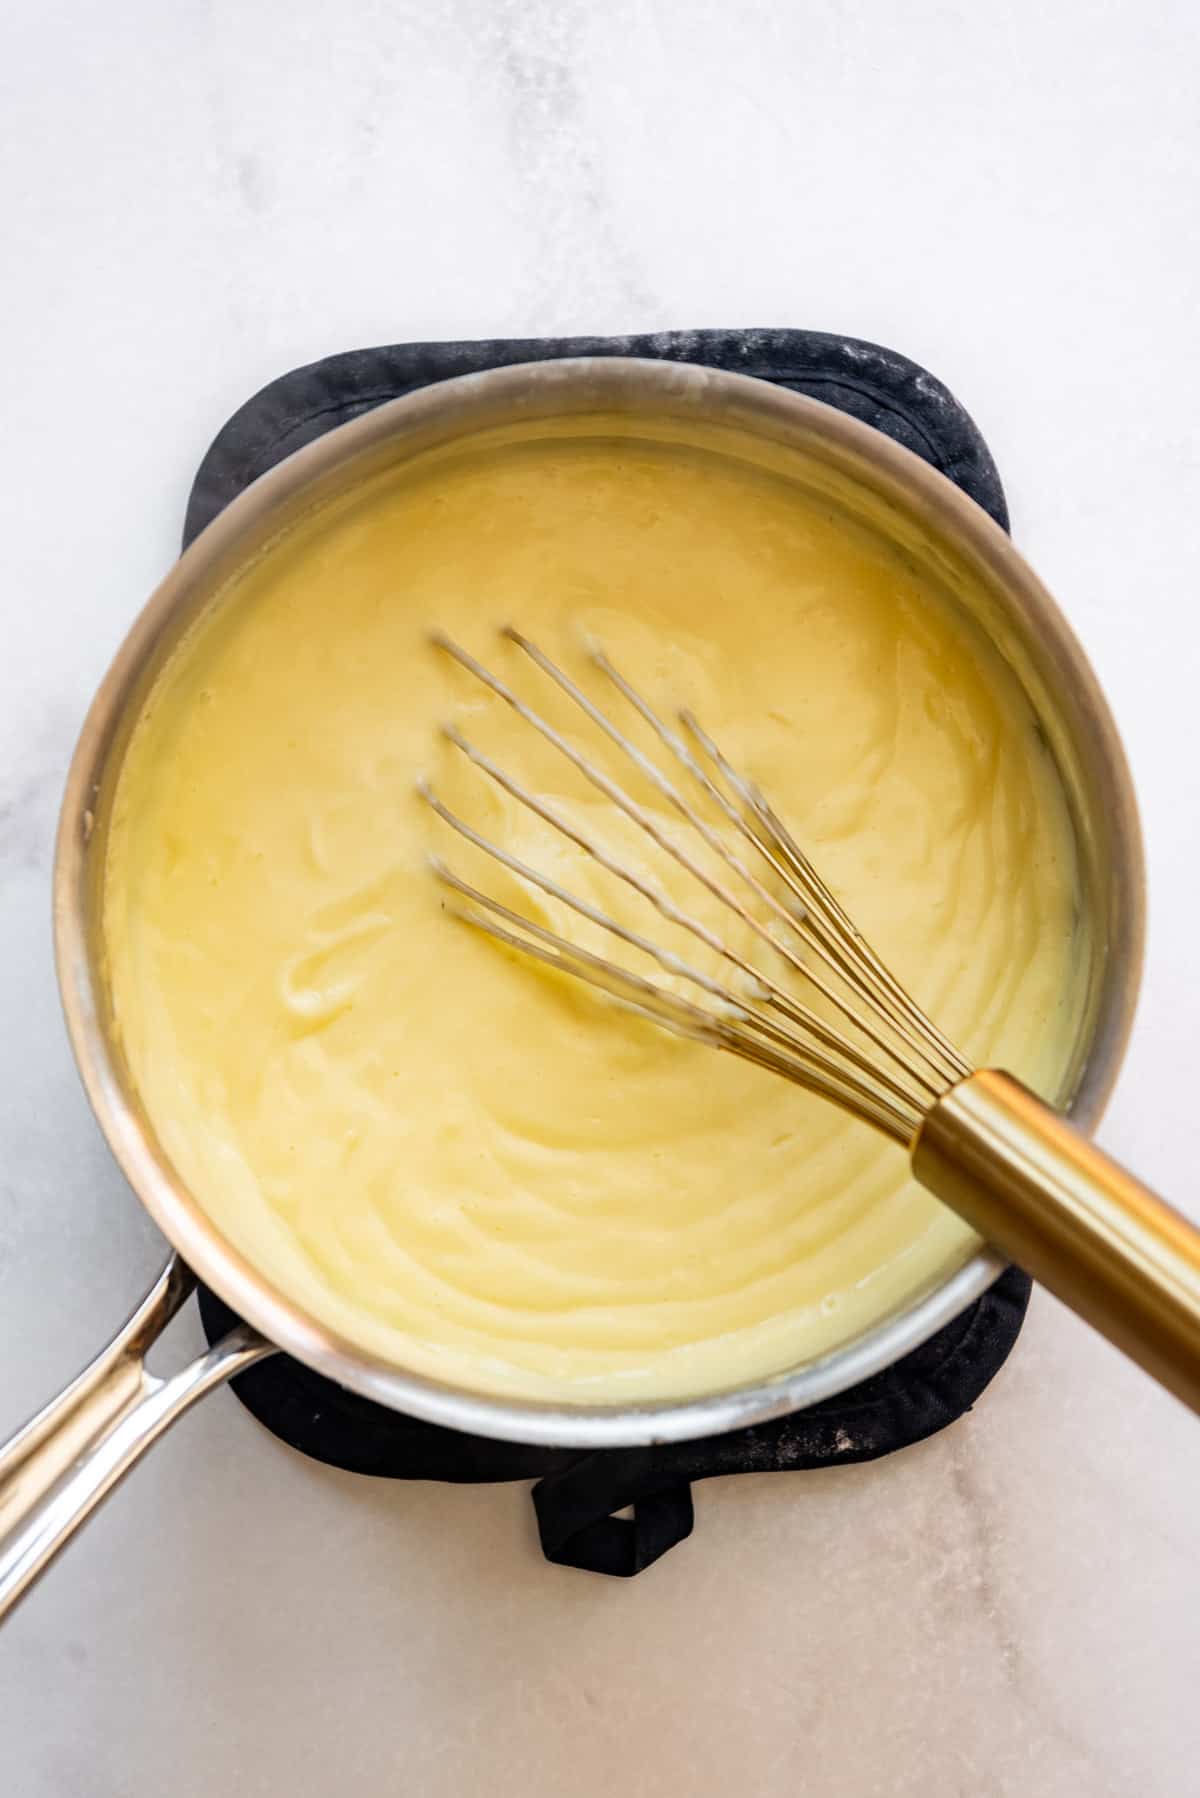 Heating tempered egg yolks and cornstarch in a milk and cream mixture in a saucepan until thick.